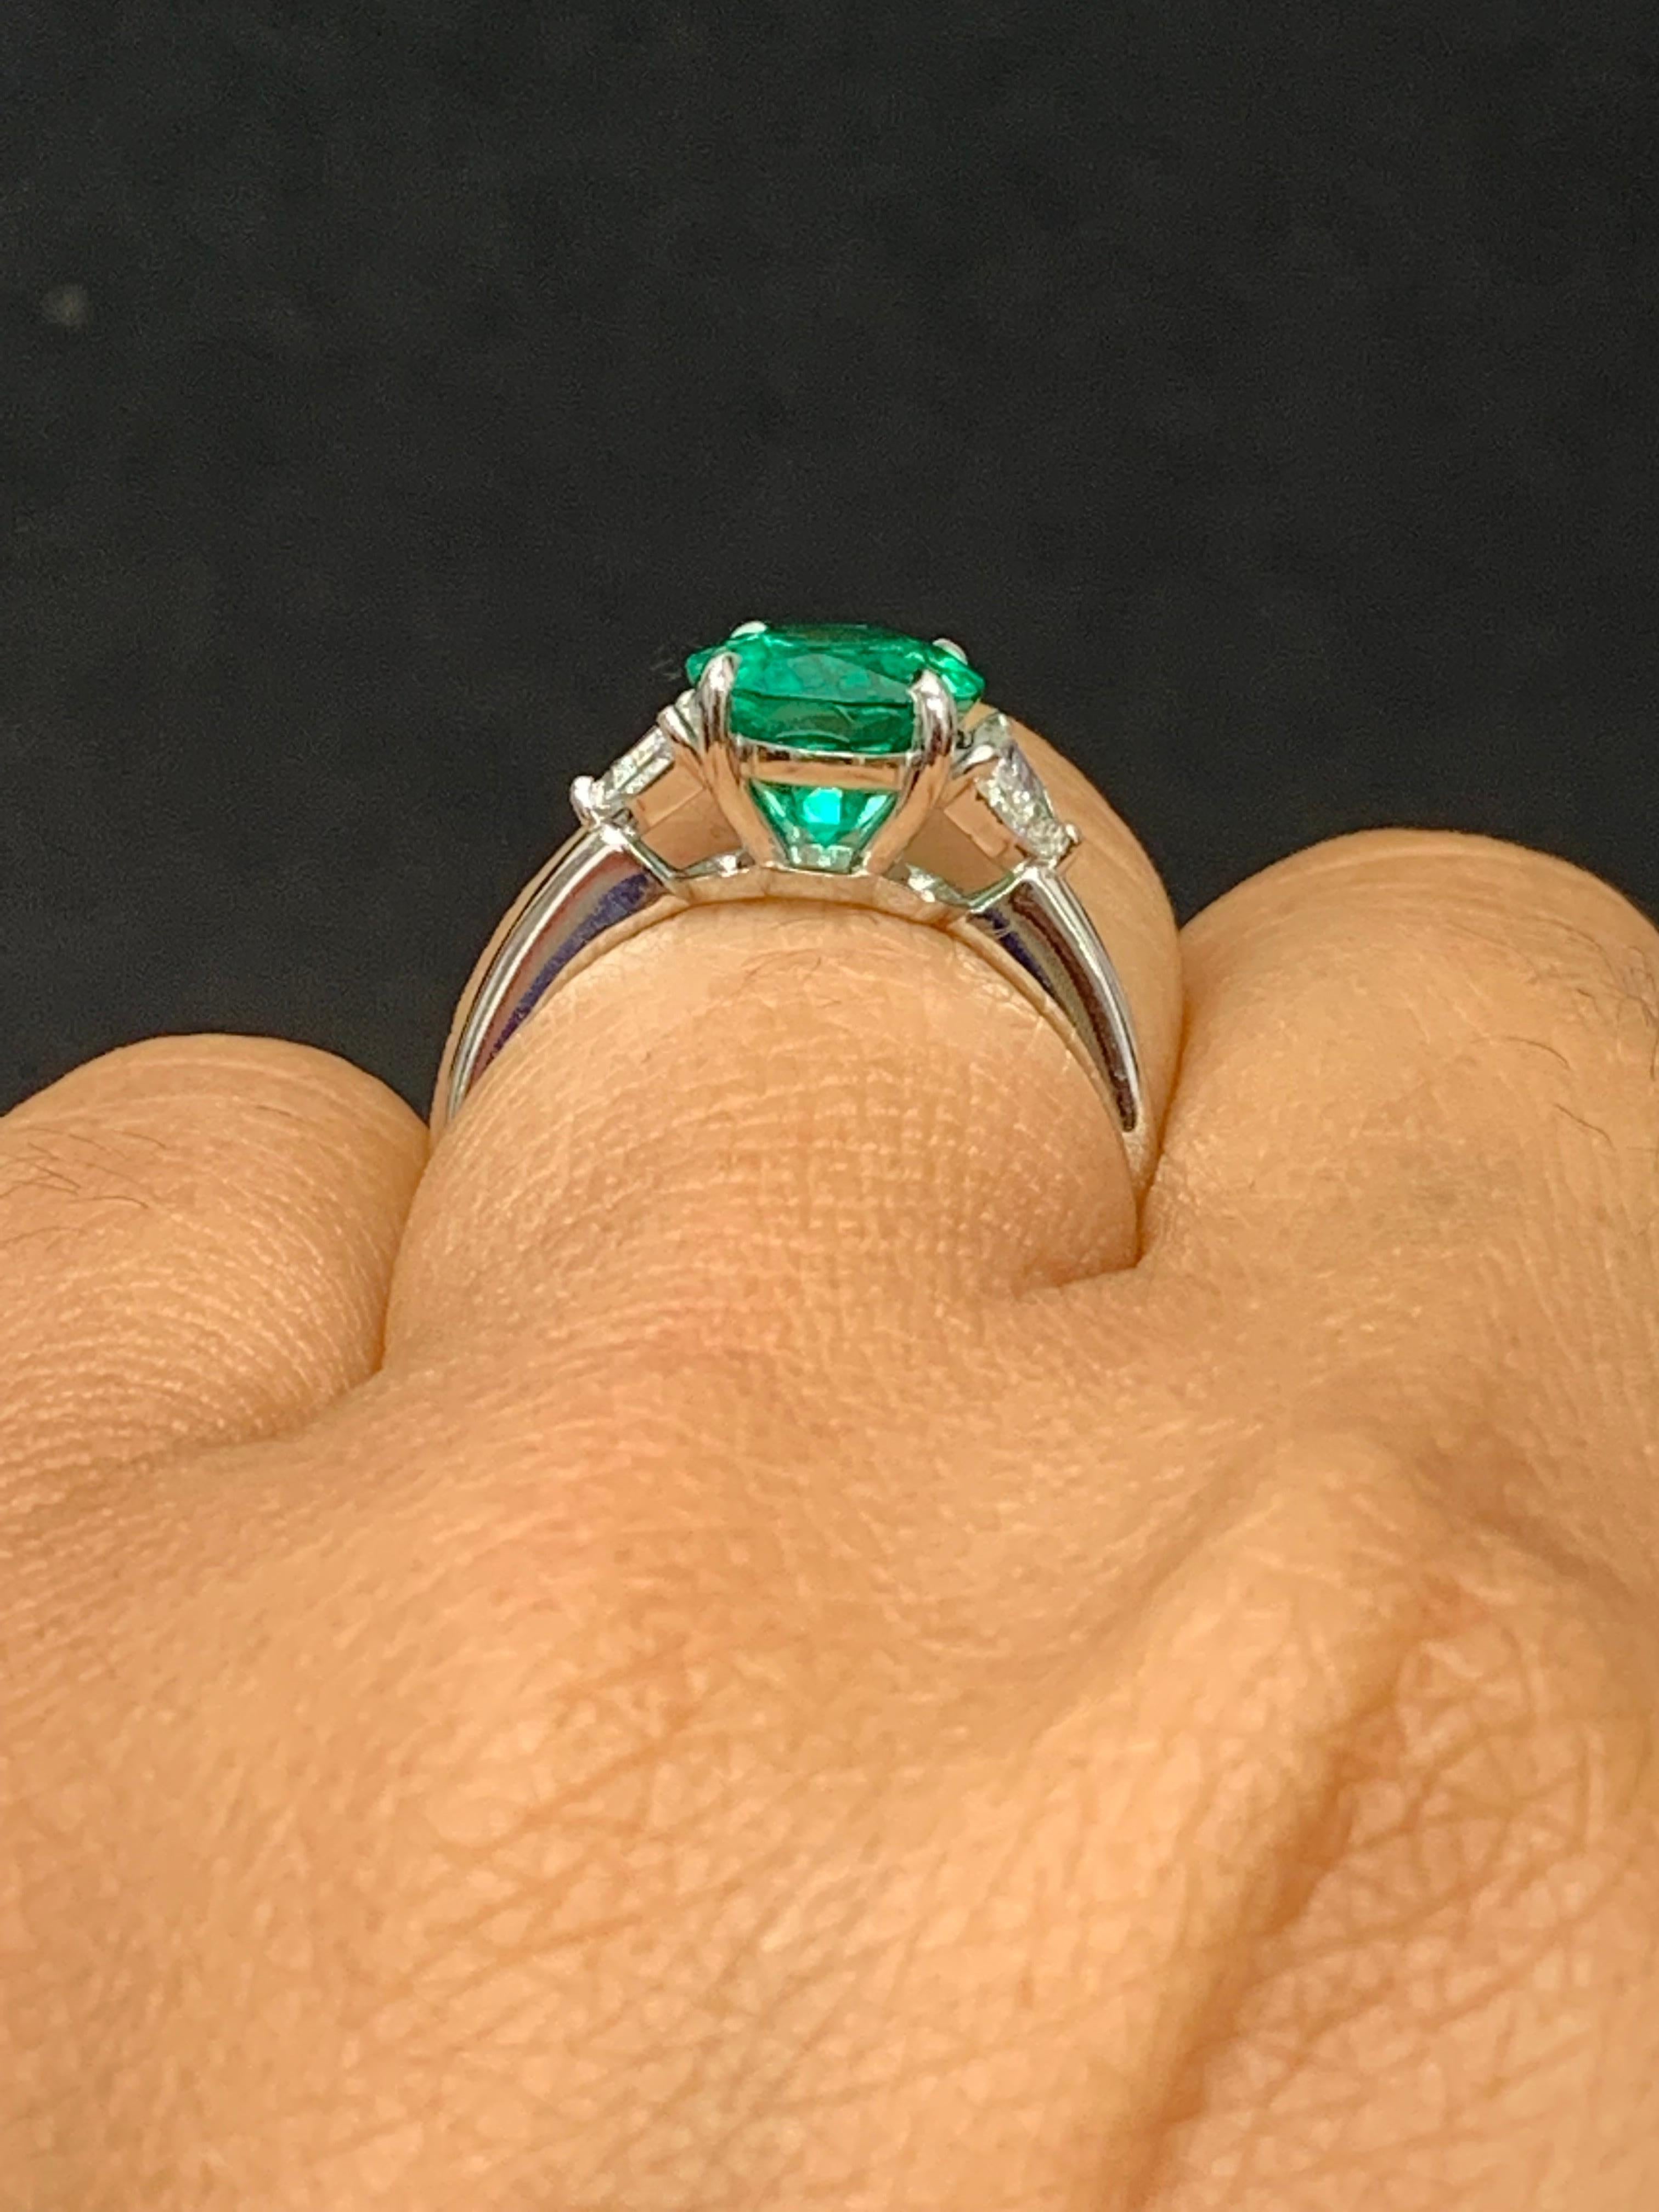 Certified 2.72 Carat Oval Cut Emerald Diamond Engagement Ring in Platinum For Sale 2